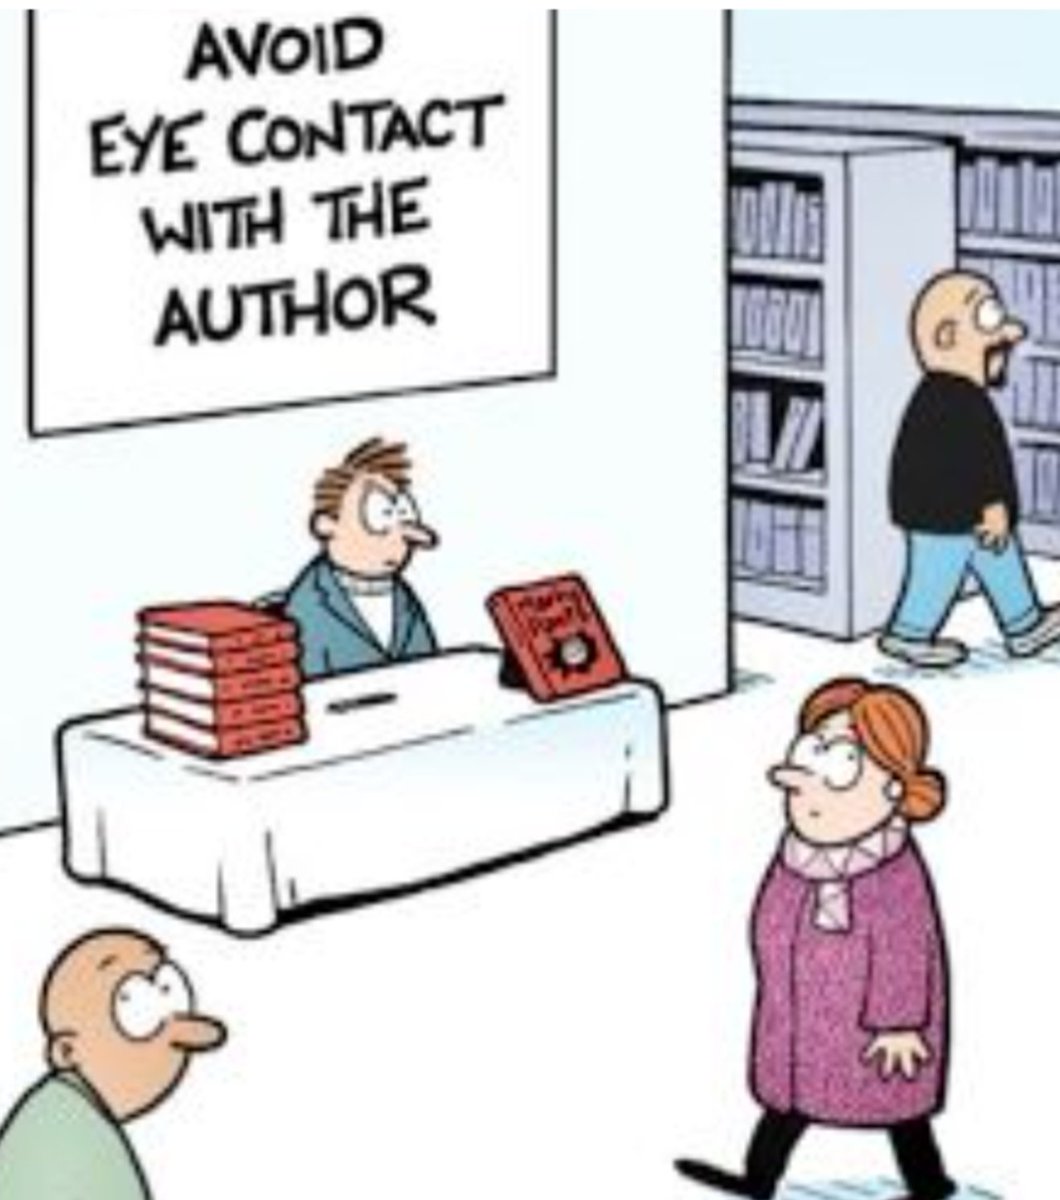 #FridayFunny Avoid eye contact with the author.